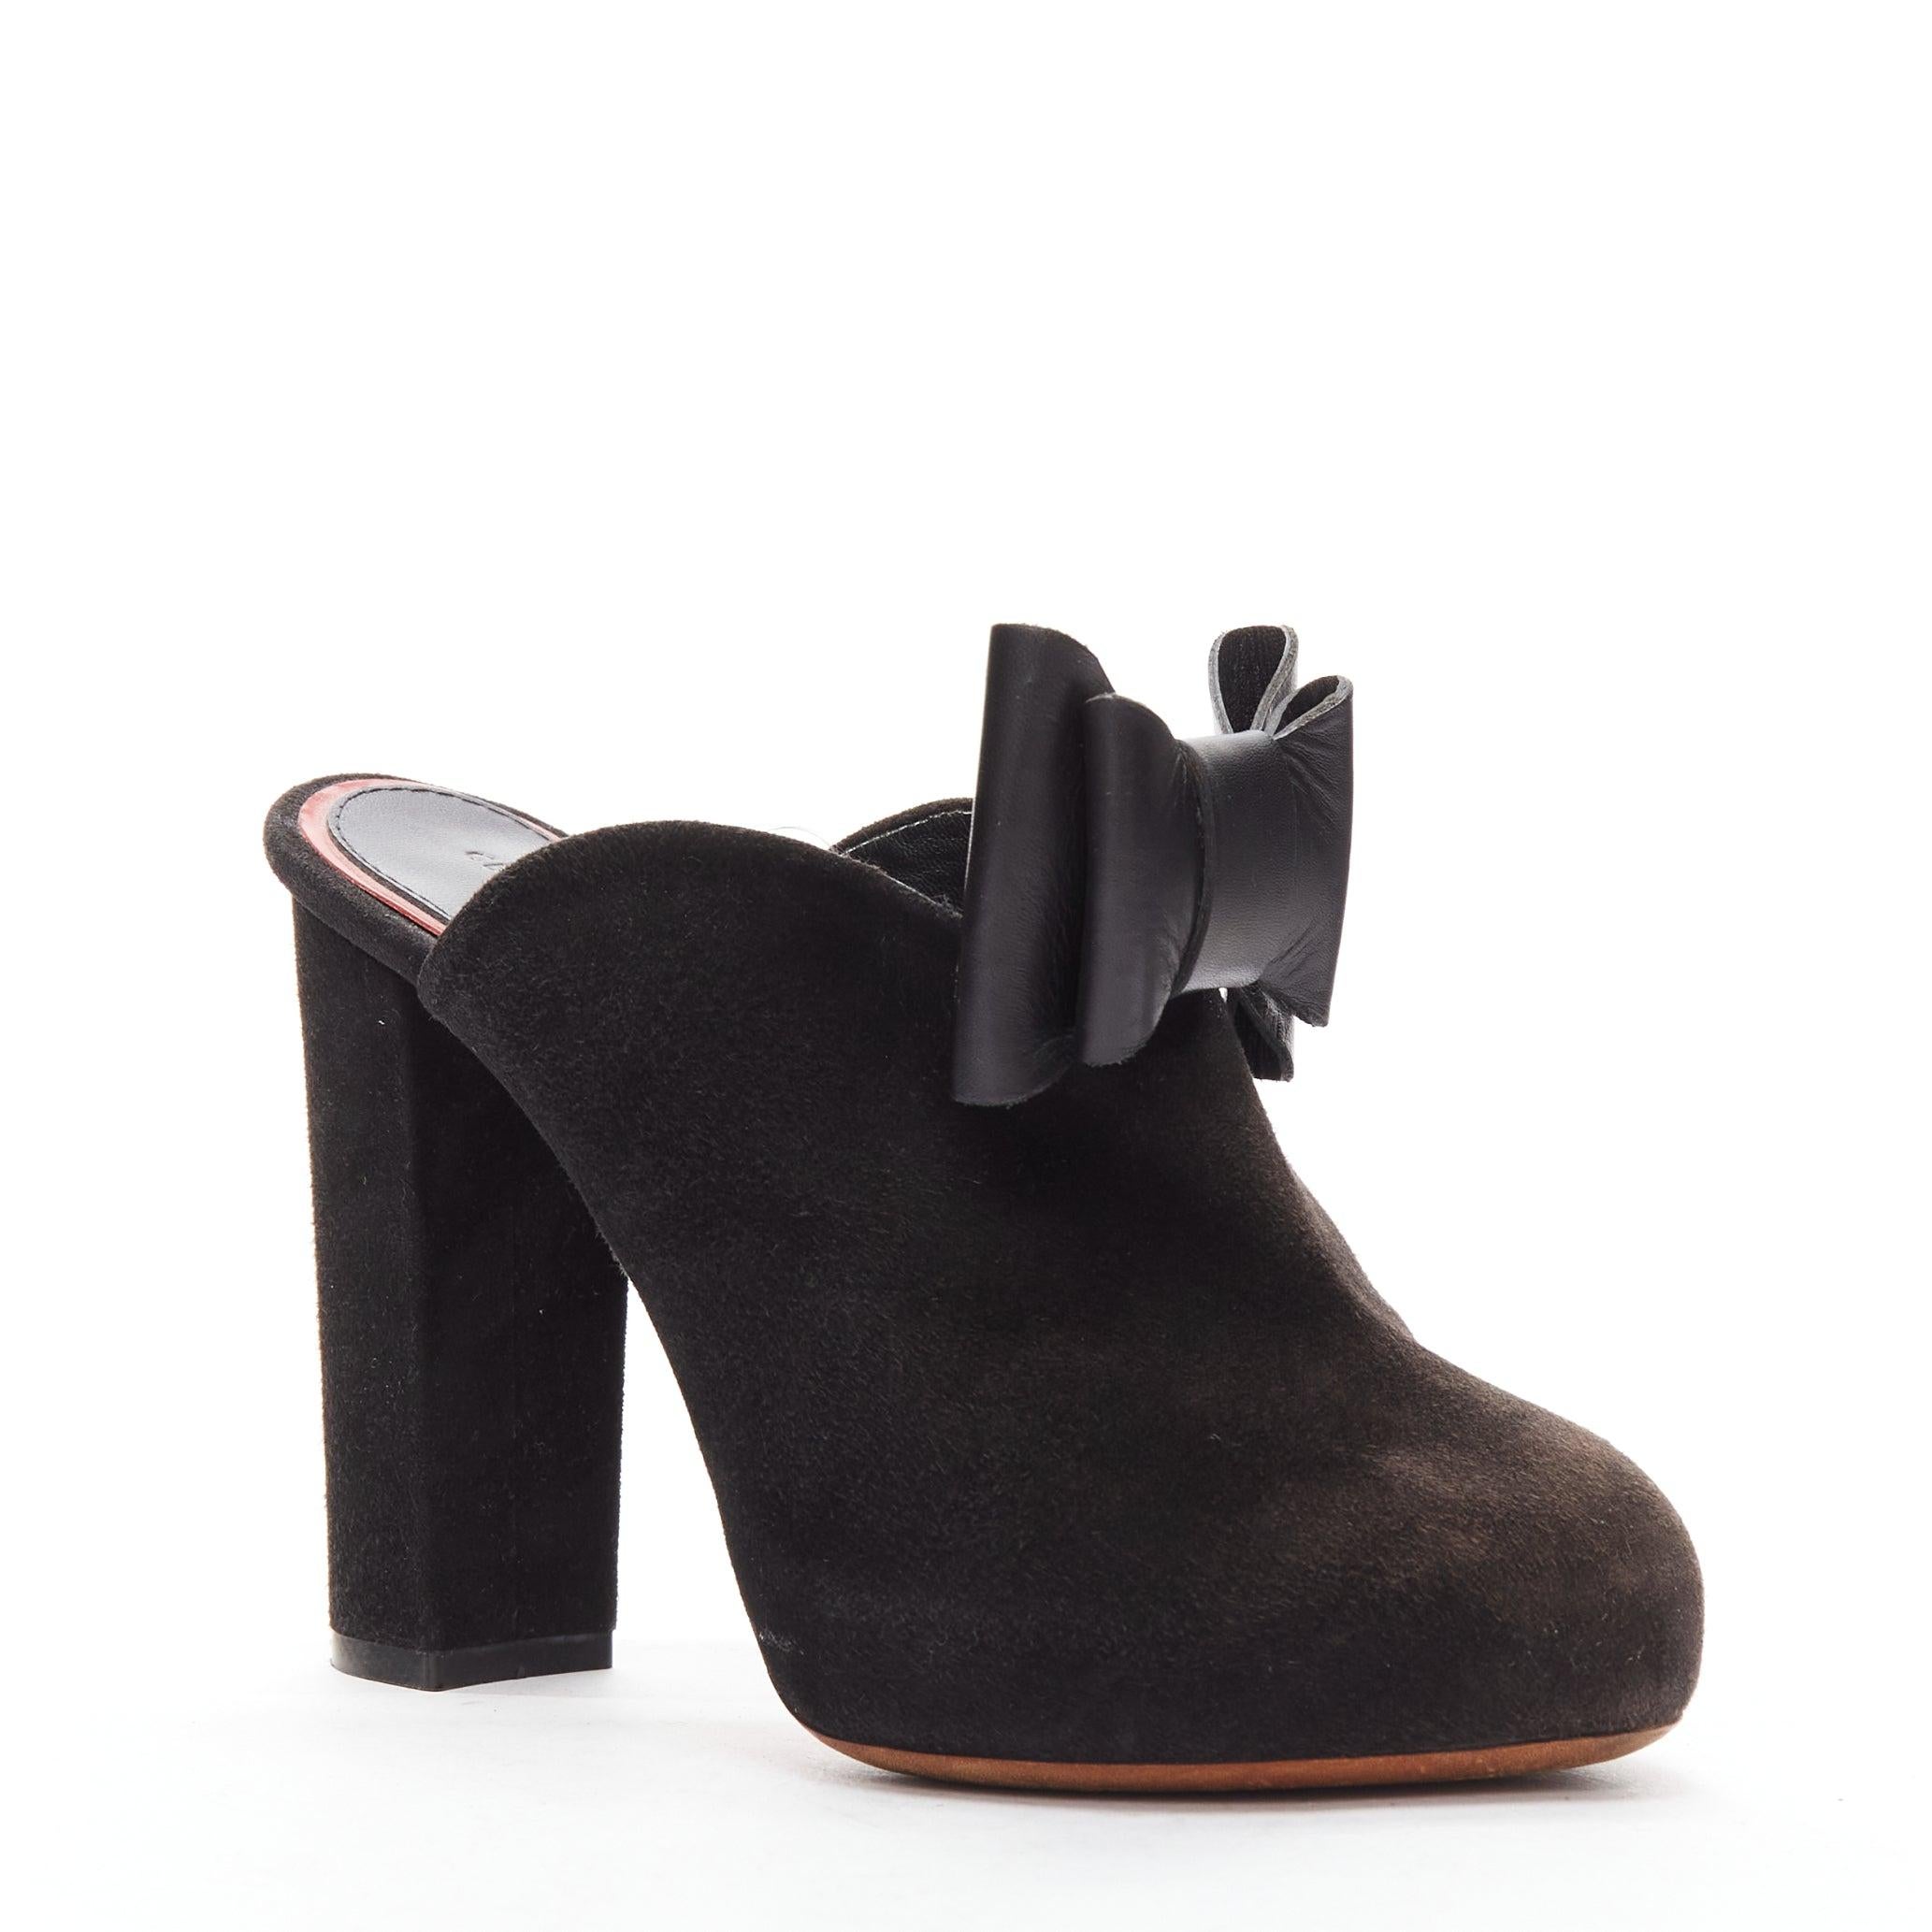 OLD CELINE Phoebe Philo black suede bow high heel mules EU36.5
Reference: TGAS/D00548
Brand: Celine
Designer: Phoebe Philo
Collection: Runway
Material: Suede
Color: Black
Pattern: Solid
Closure: Slip On
Lining: Black Leather
Made in: